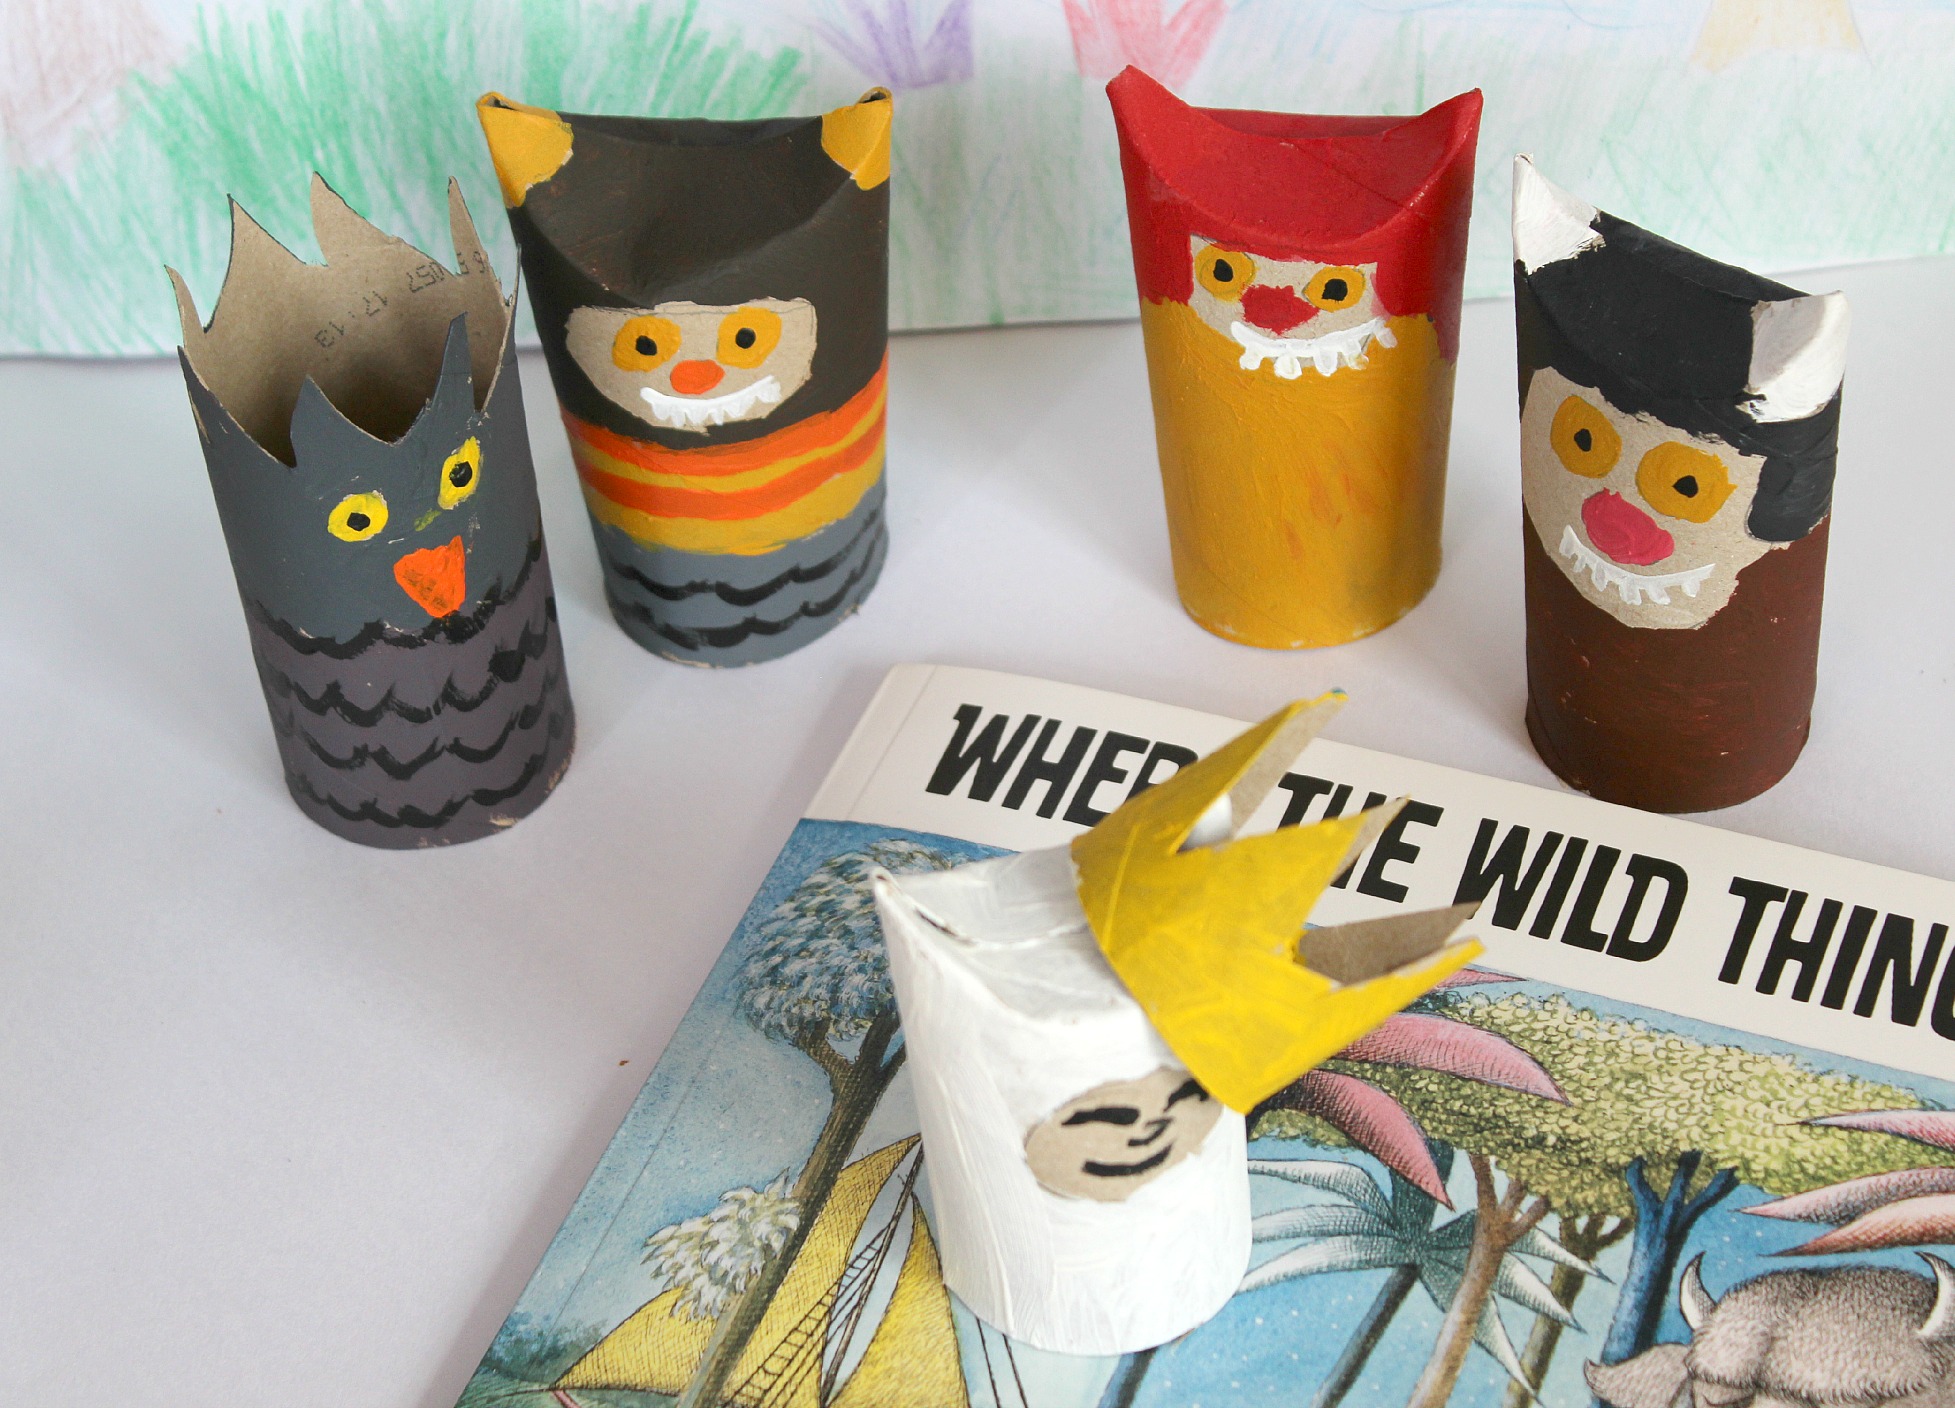 15 fantastic crafts to keep your kids busy this summer!